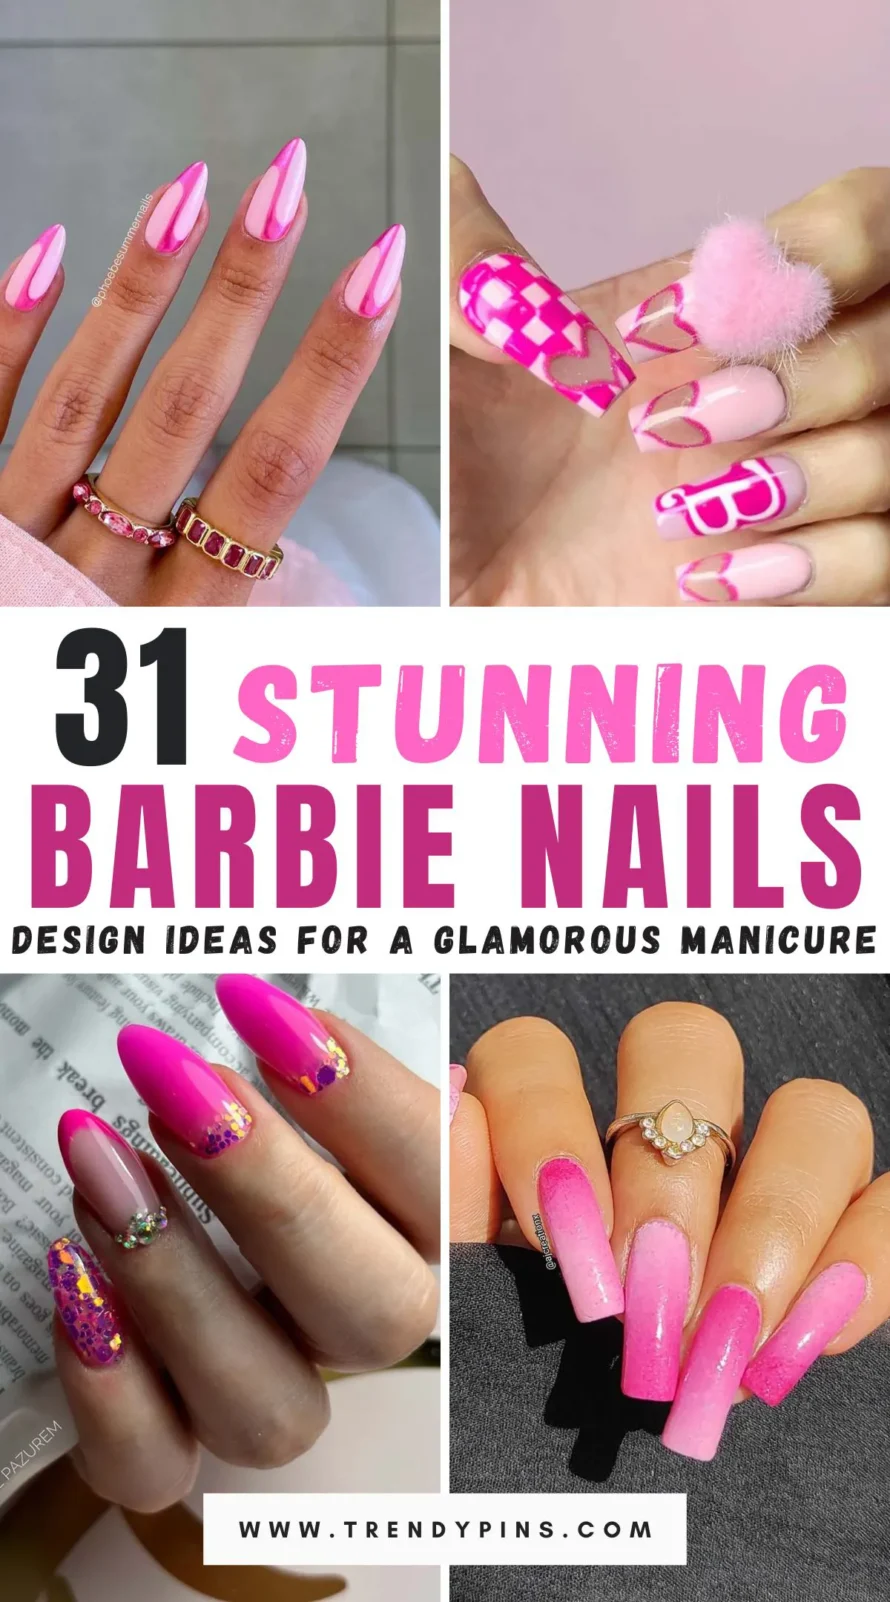 Get ready to glam up your manicure with these 31 stunning Barbie nails design ideas! Perfect for adding a touch of elegance and fun to your look.